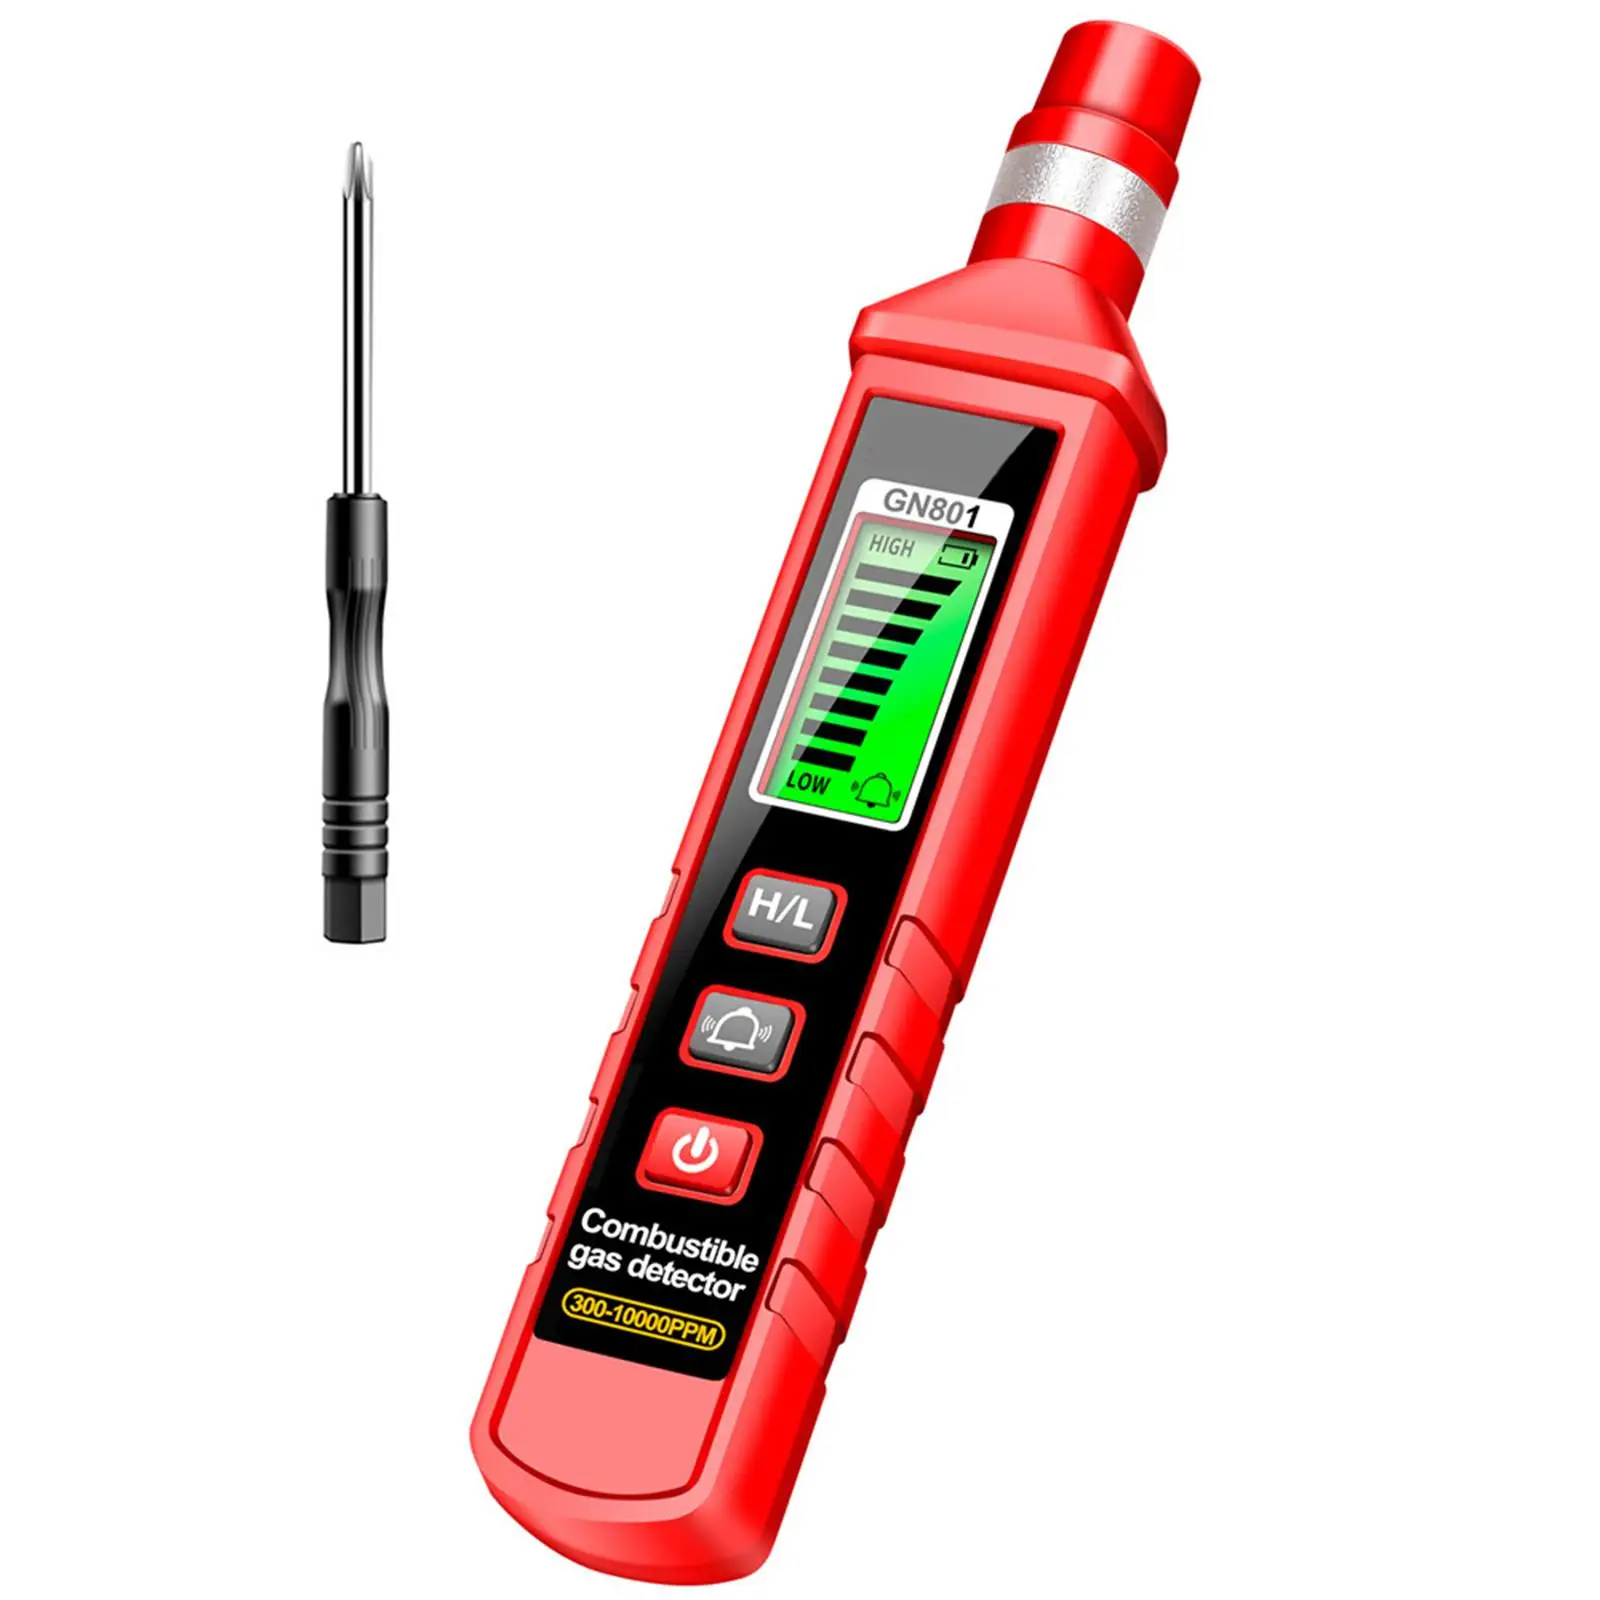 Gas Detection Pen Compact Auto Off Easy to Use Gas Leak Tester for RV Home